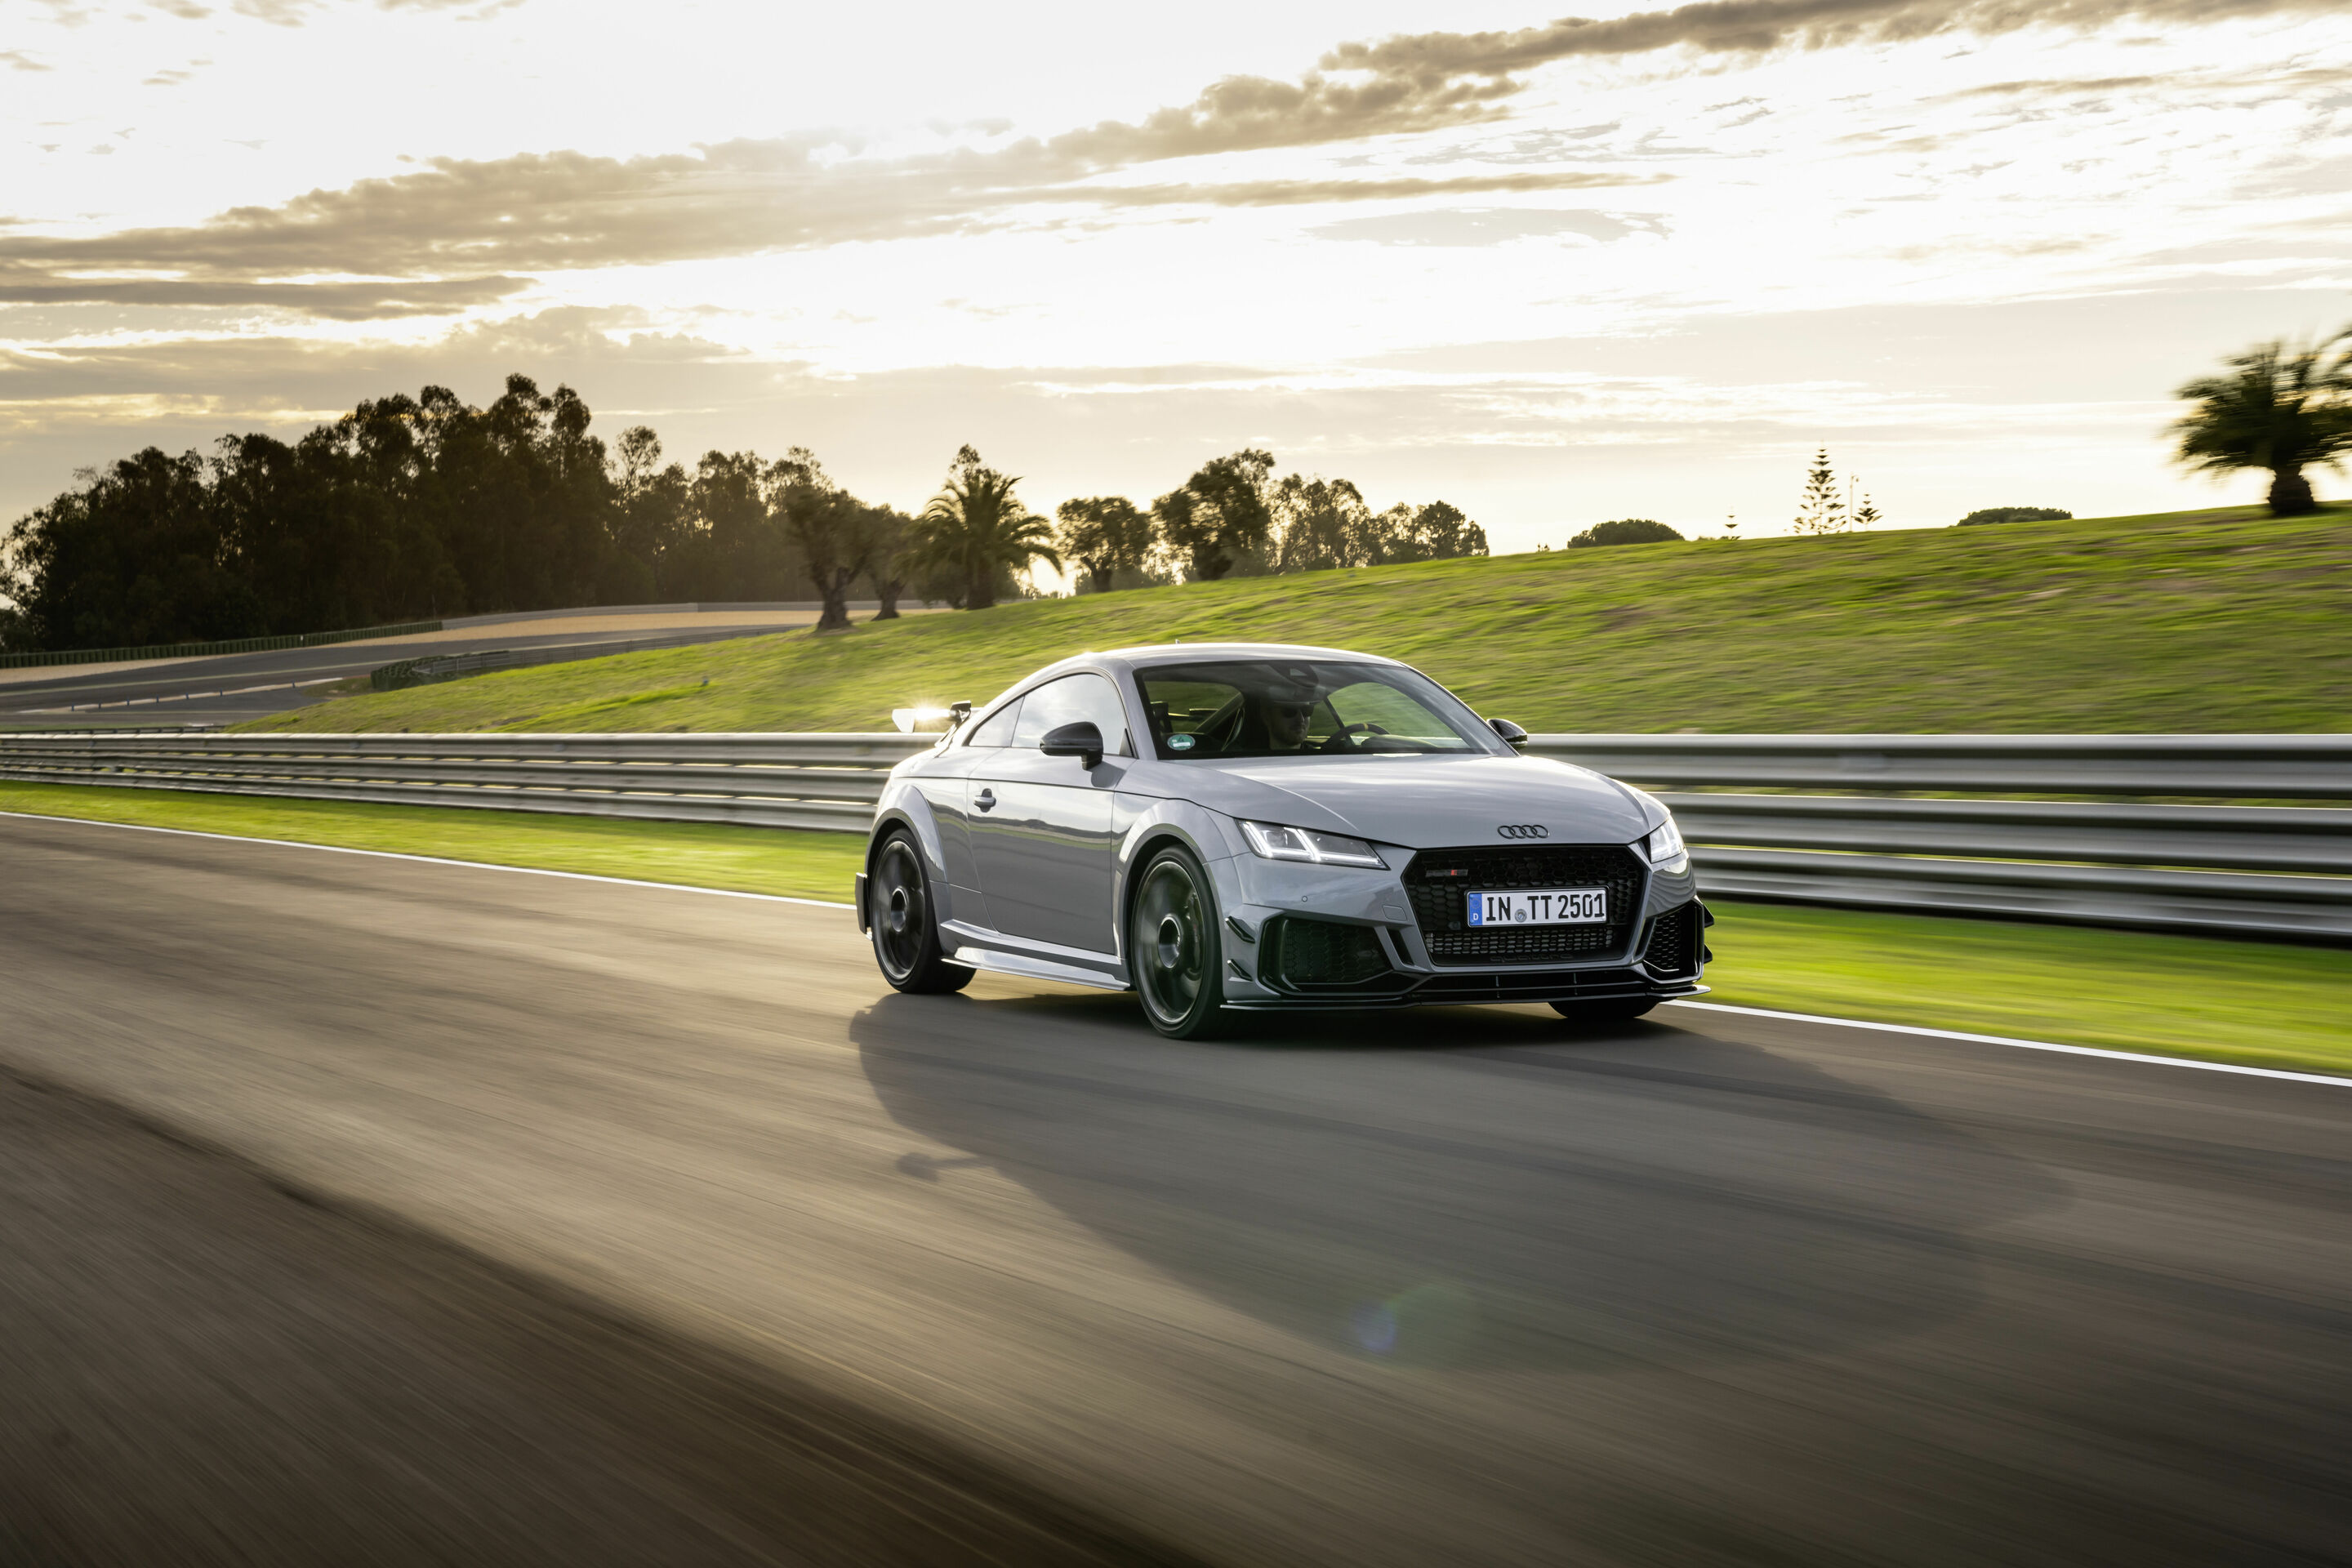 Inspired by Bauhaus Simplicity  How Audi TT Became a Design Icon